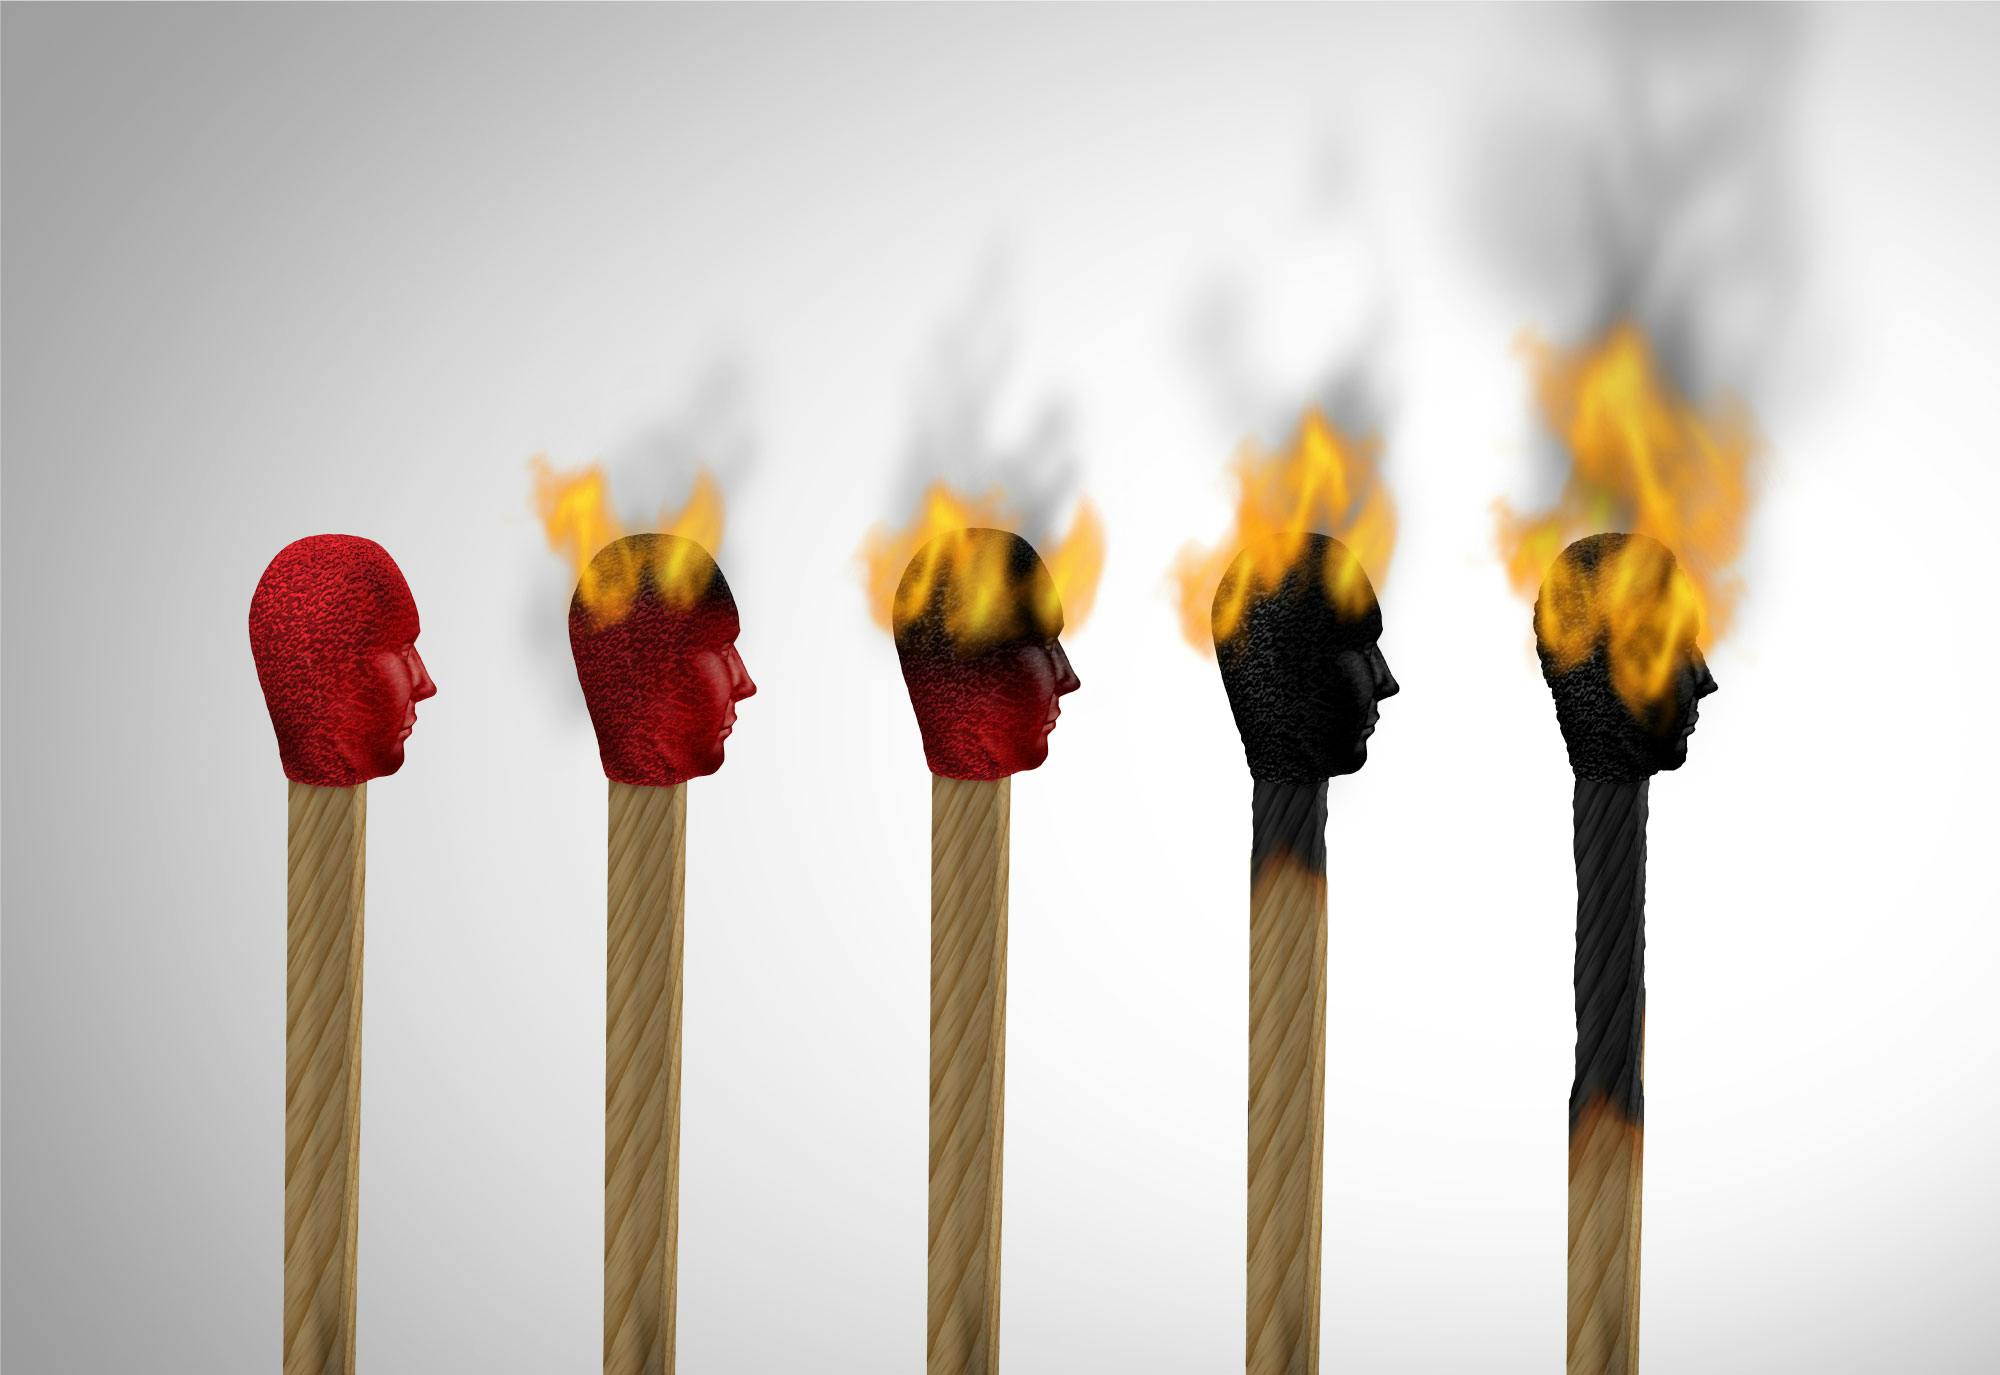 Illustration of five matches with fires flames at different burning stages